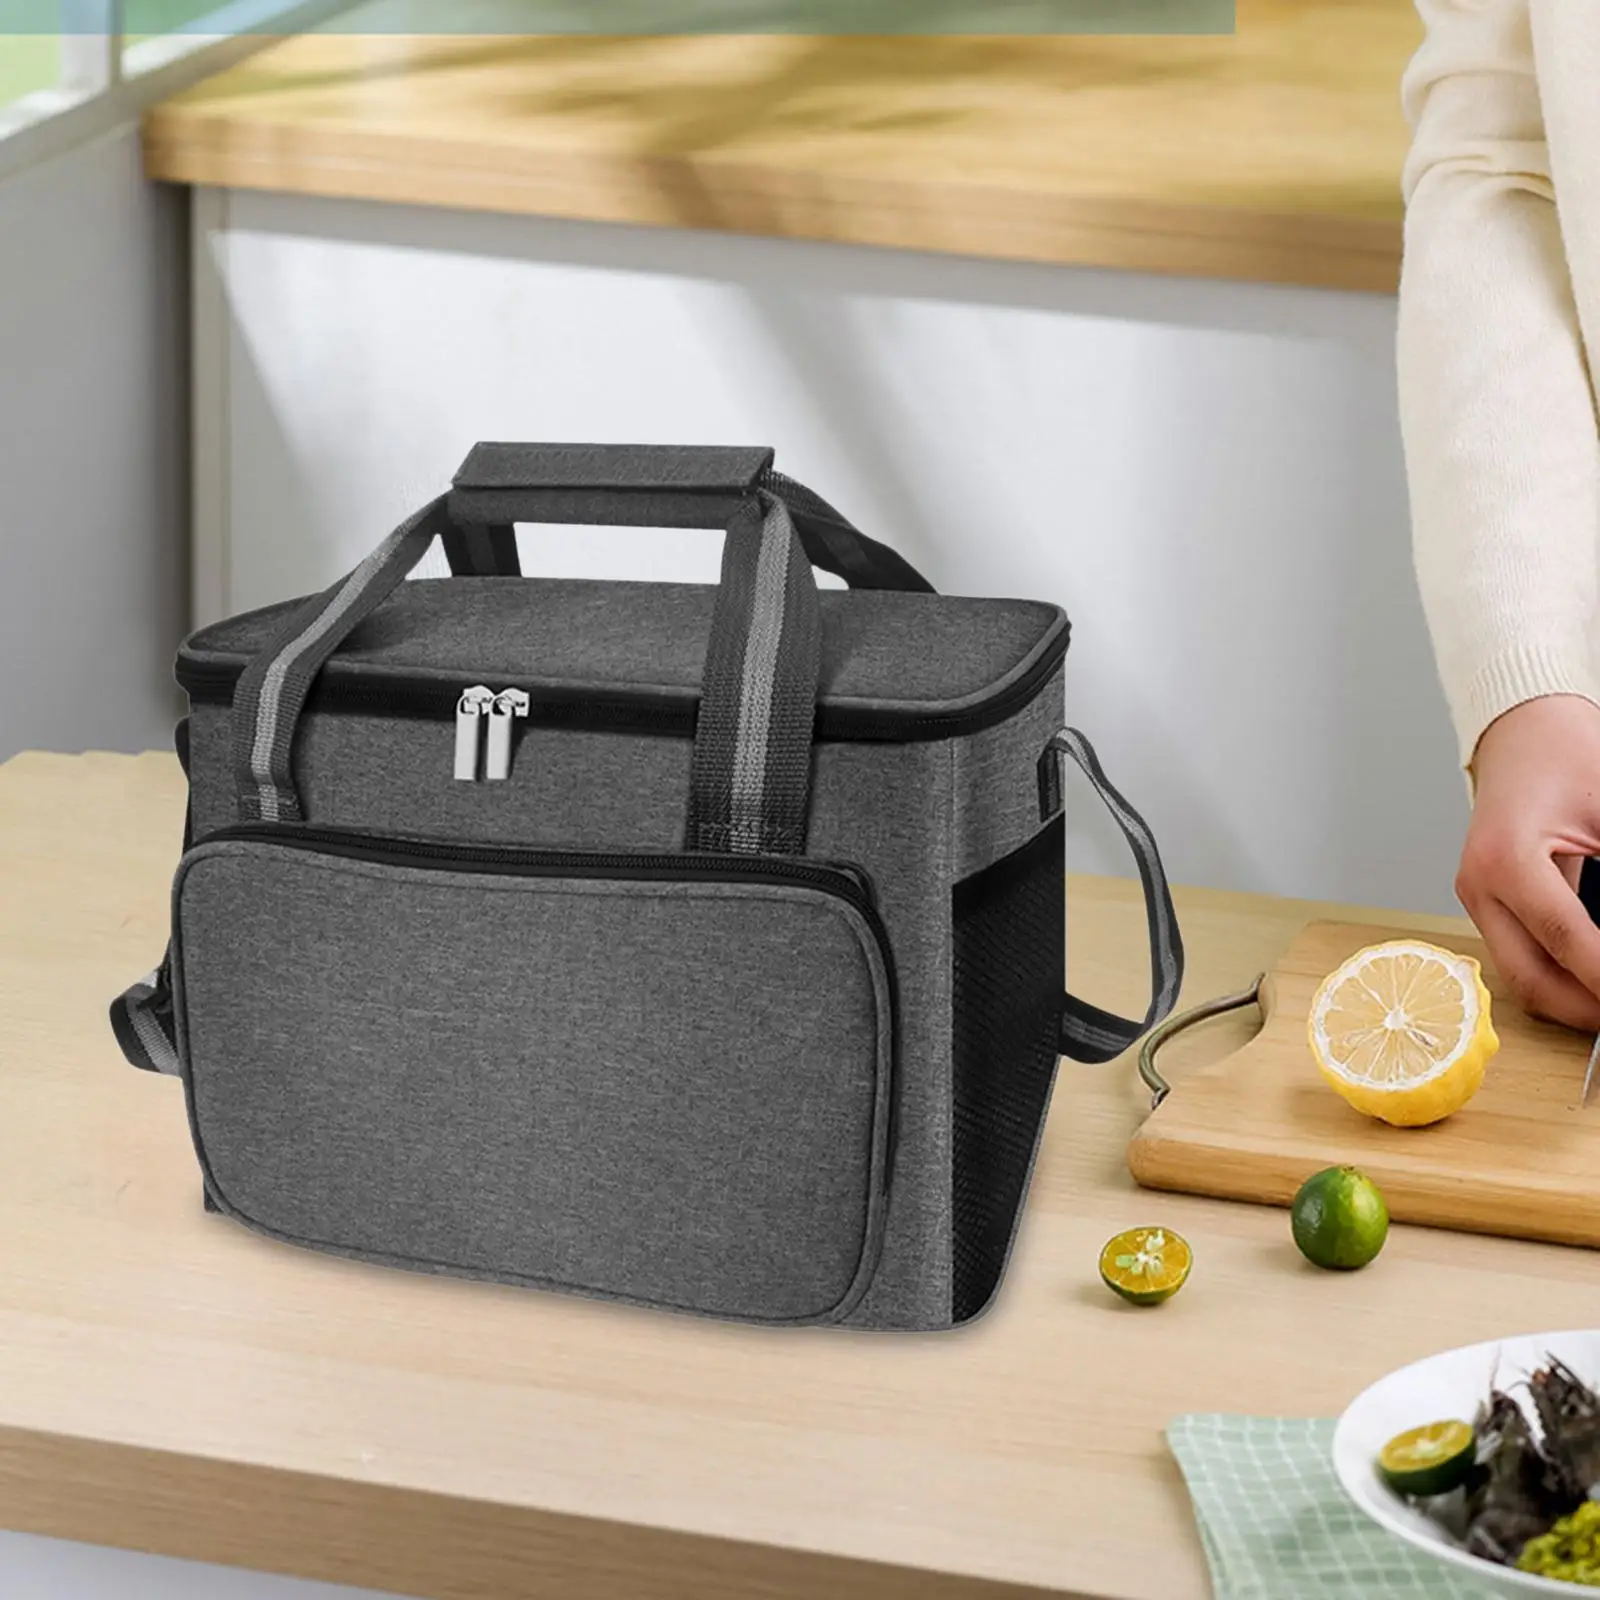 Insulated Lunch Bag Leakproof with Shoulder Strap and Top Handle Grocery Shopping Bag Lunch Cooler Bag for Camping Beach BBQ